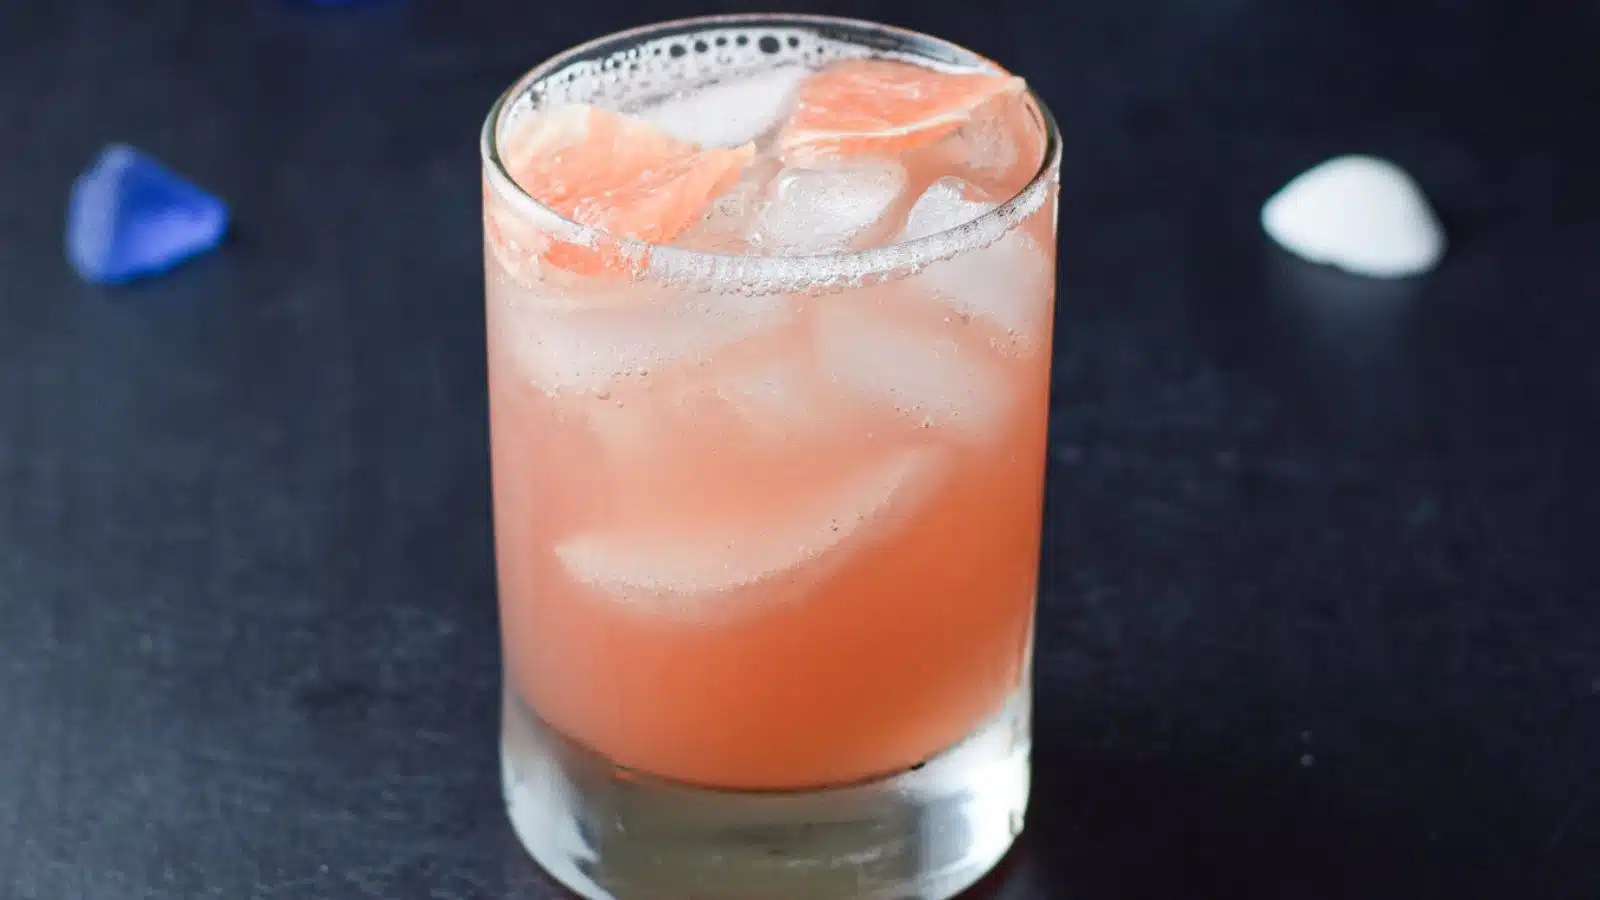 a double old fashioned glass filled with the grapefruit drink